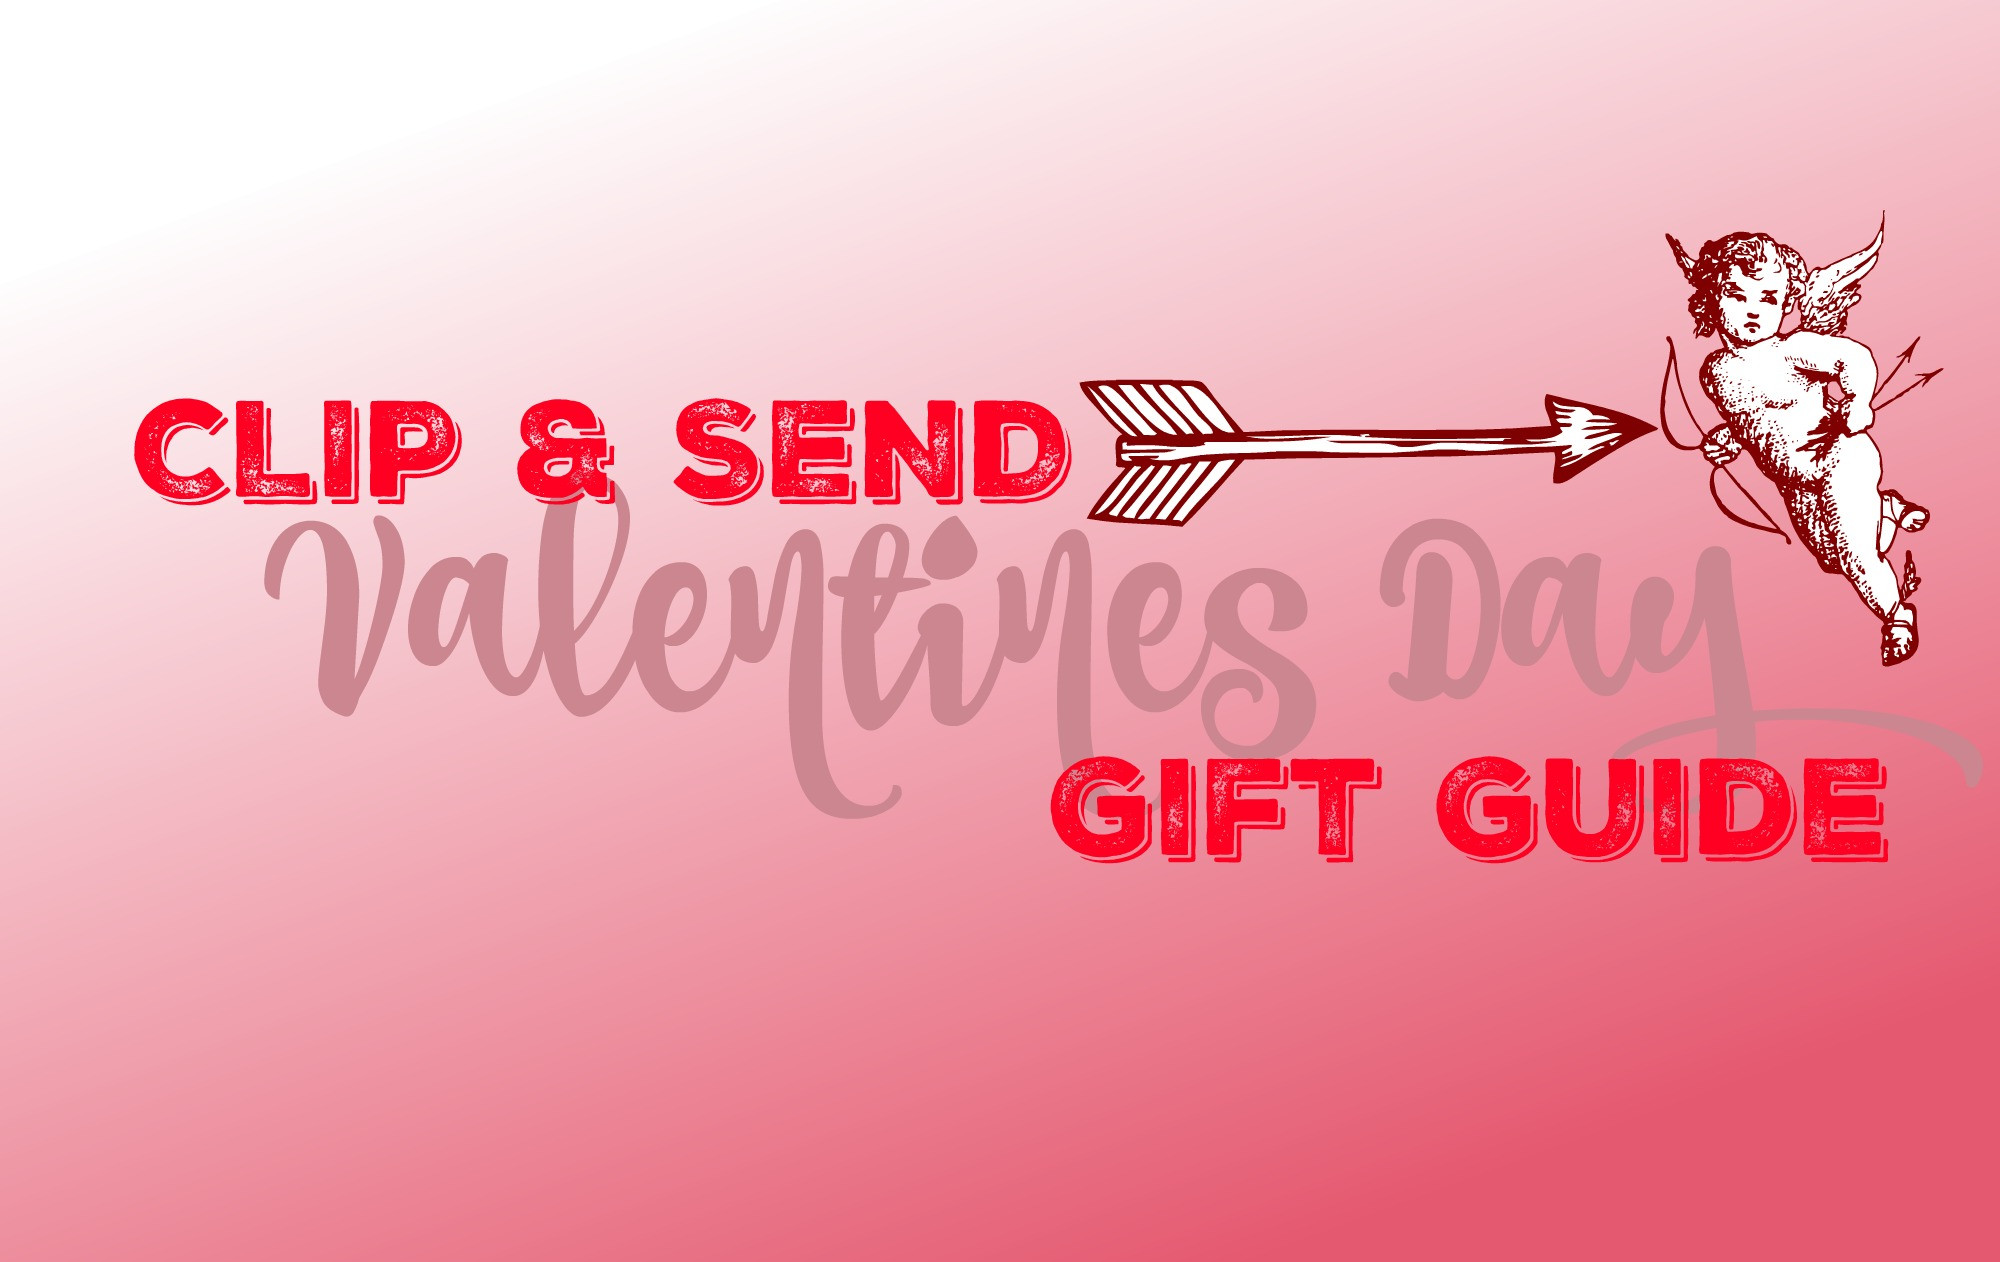 Send Valentines Day Gift
 Clip & Send Valentines Day Gift Guide Refined Side